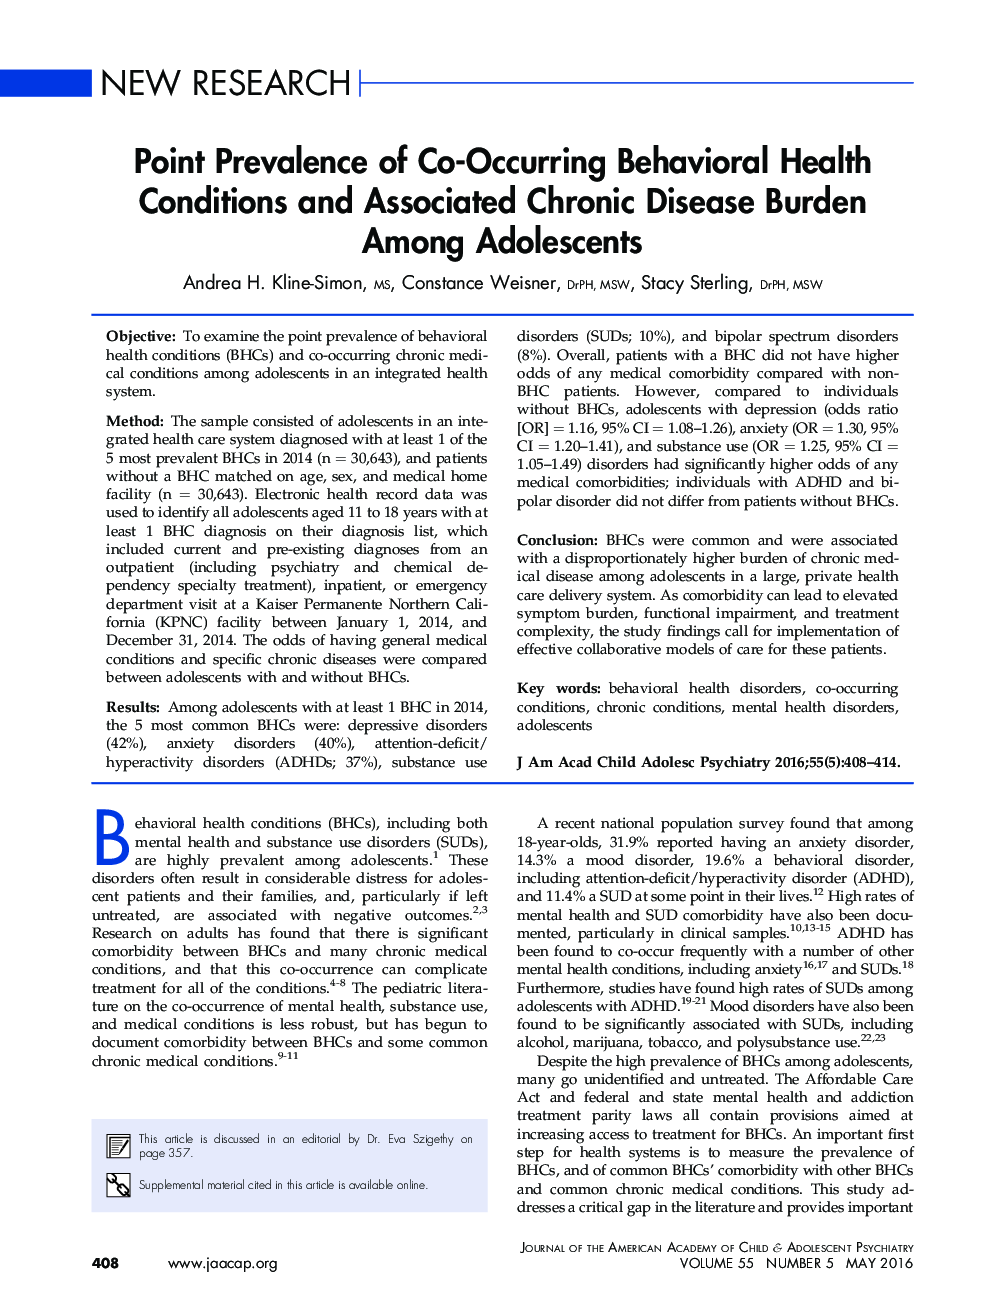 Point Prevalence of Co-Occurring Behavioral Health Conditions and Associated Chronic Disease Burden Among Adolescents 